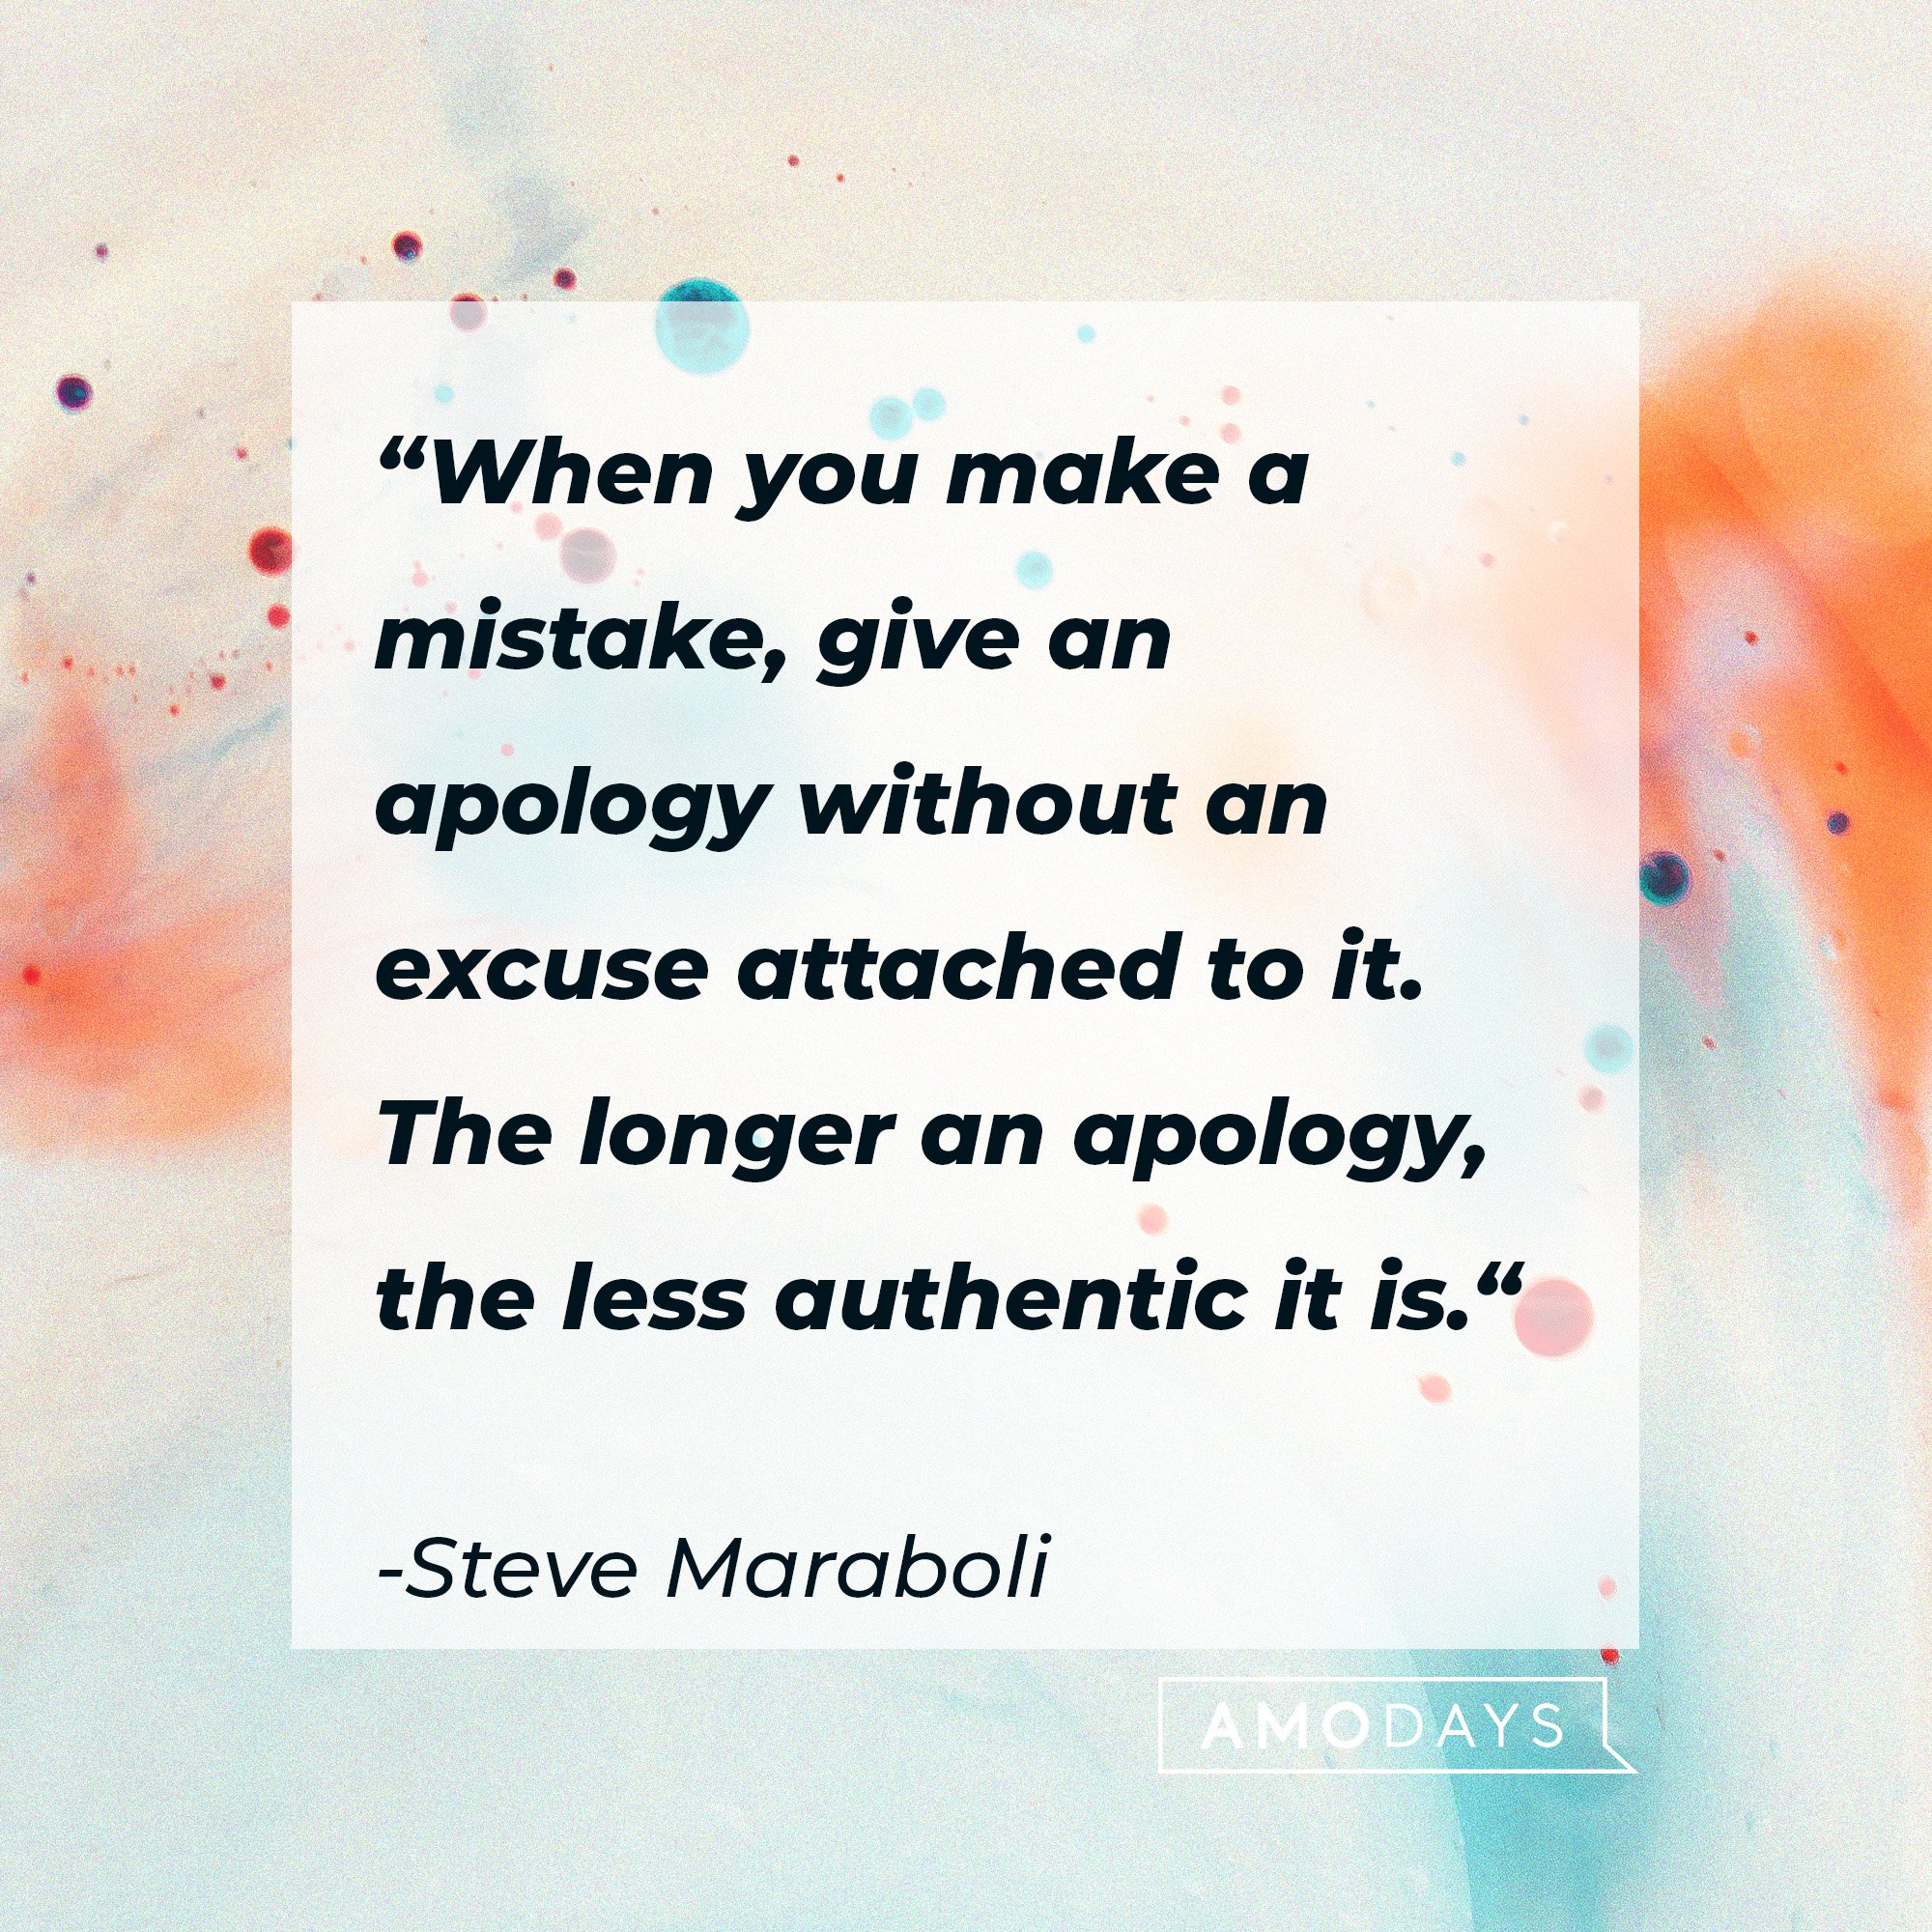 Steve Maraboli's quote: “When you make a mistake, give an apology without an excuse attached to it. The longer an apology, the less authentic it is.“ | Image: AmoDays